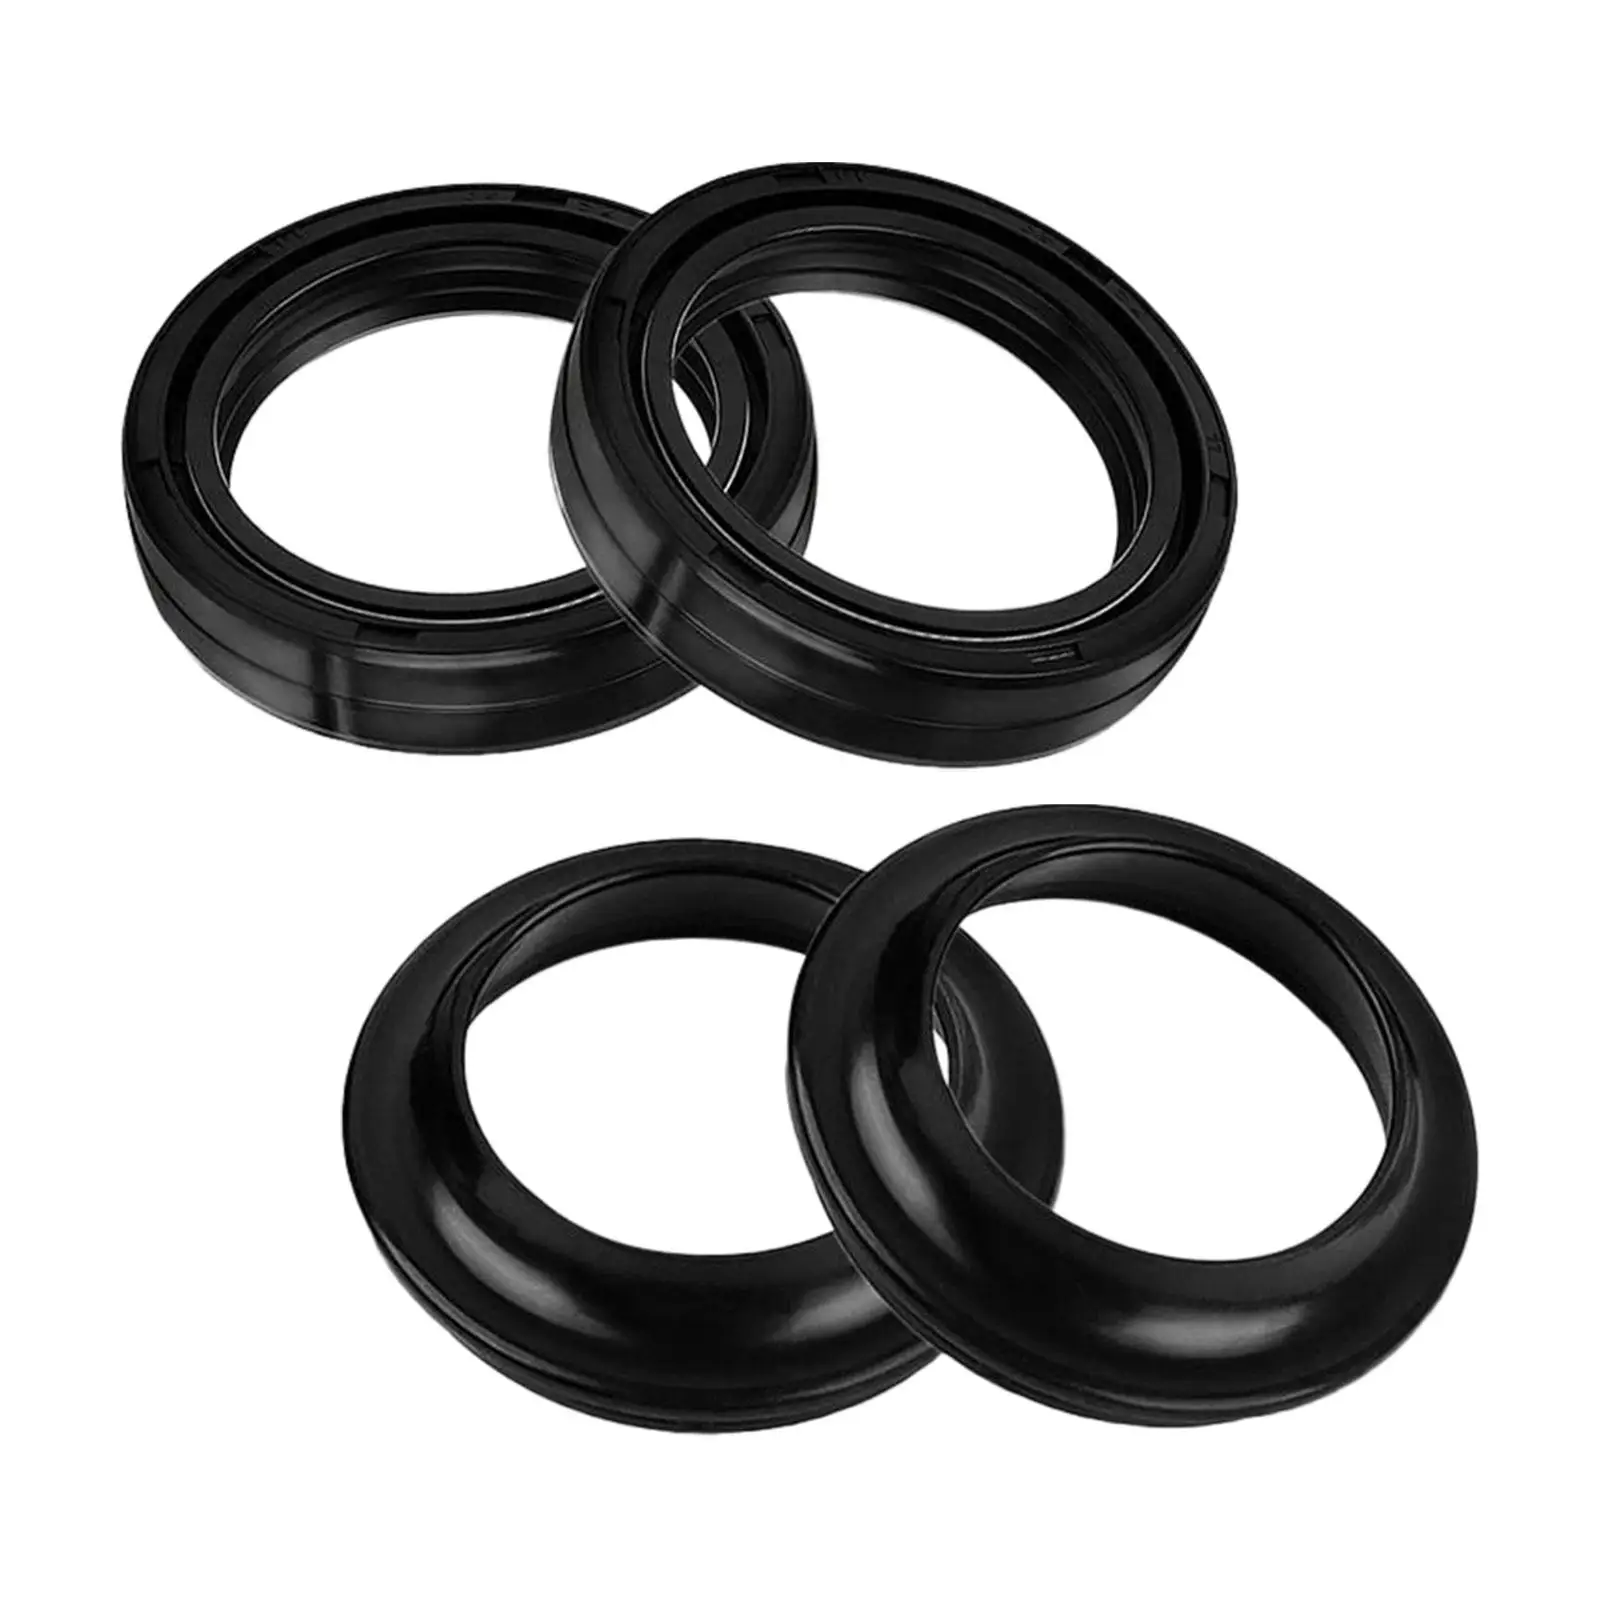 4x Motorcycle Front Fork Damper Oil Seal and Dust Seal Premium 39x52x11mm for Harley XL883N XL1200T Xlh883R XL1200C XL1200L